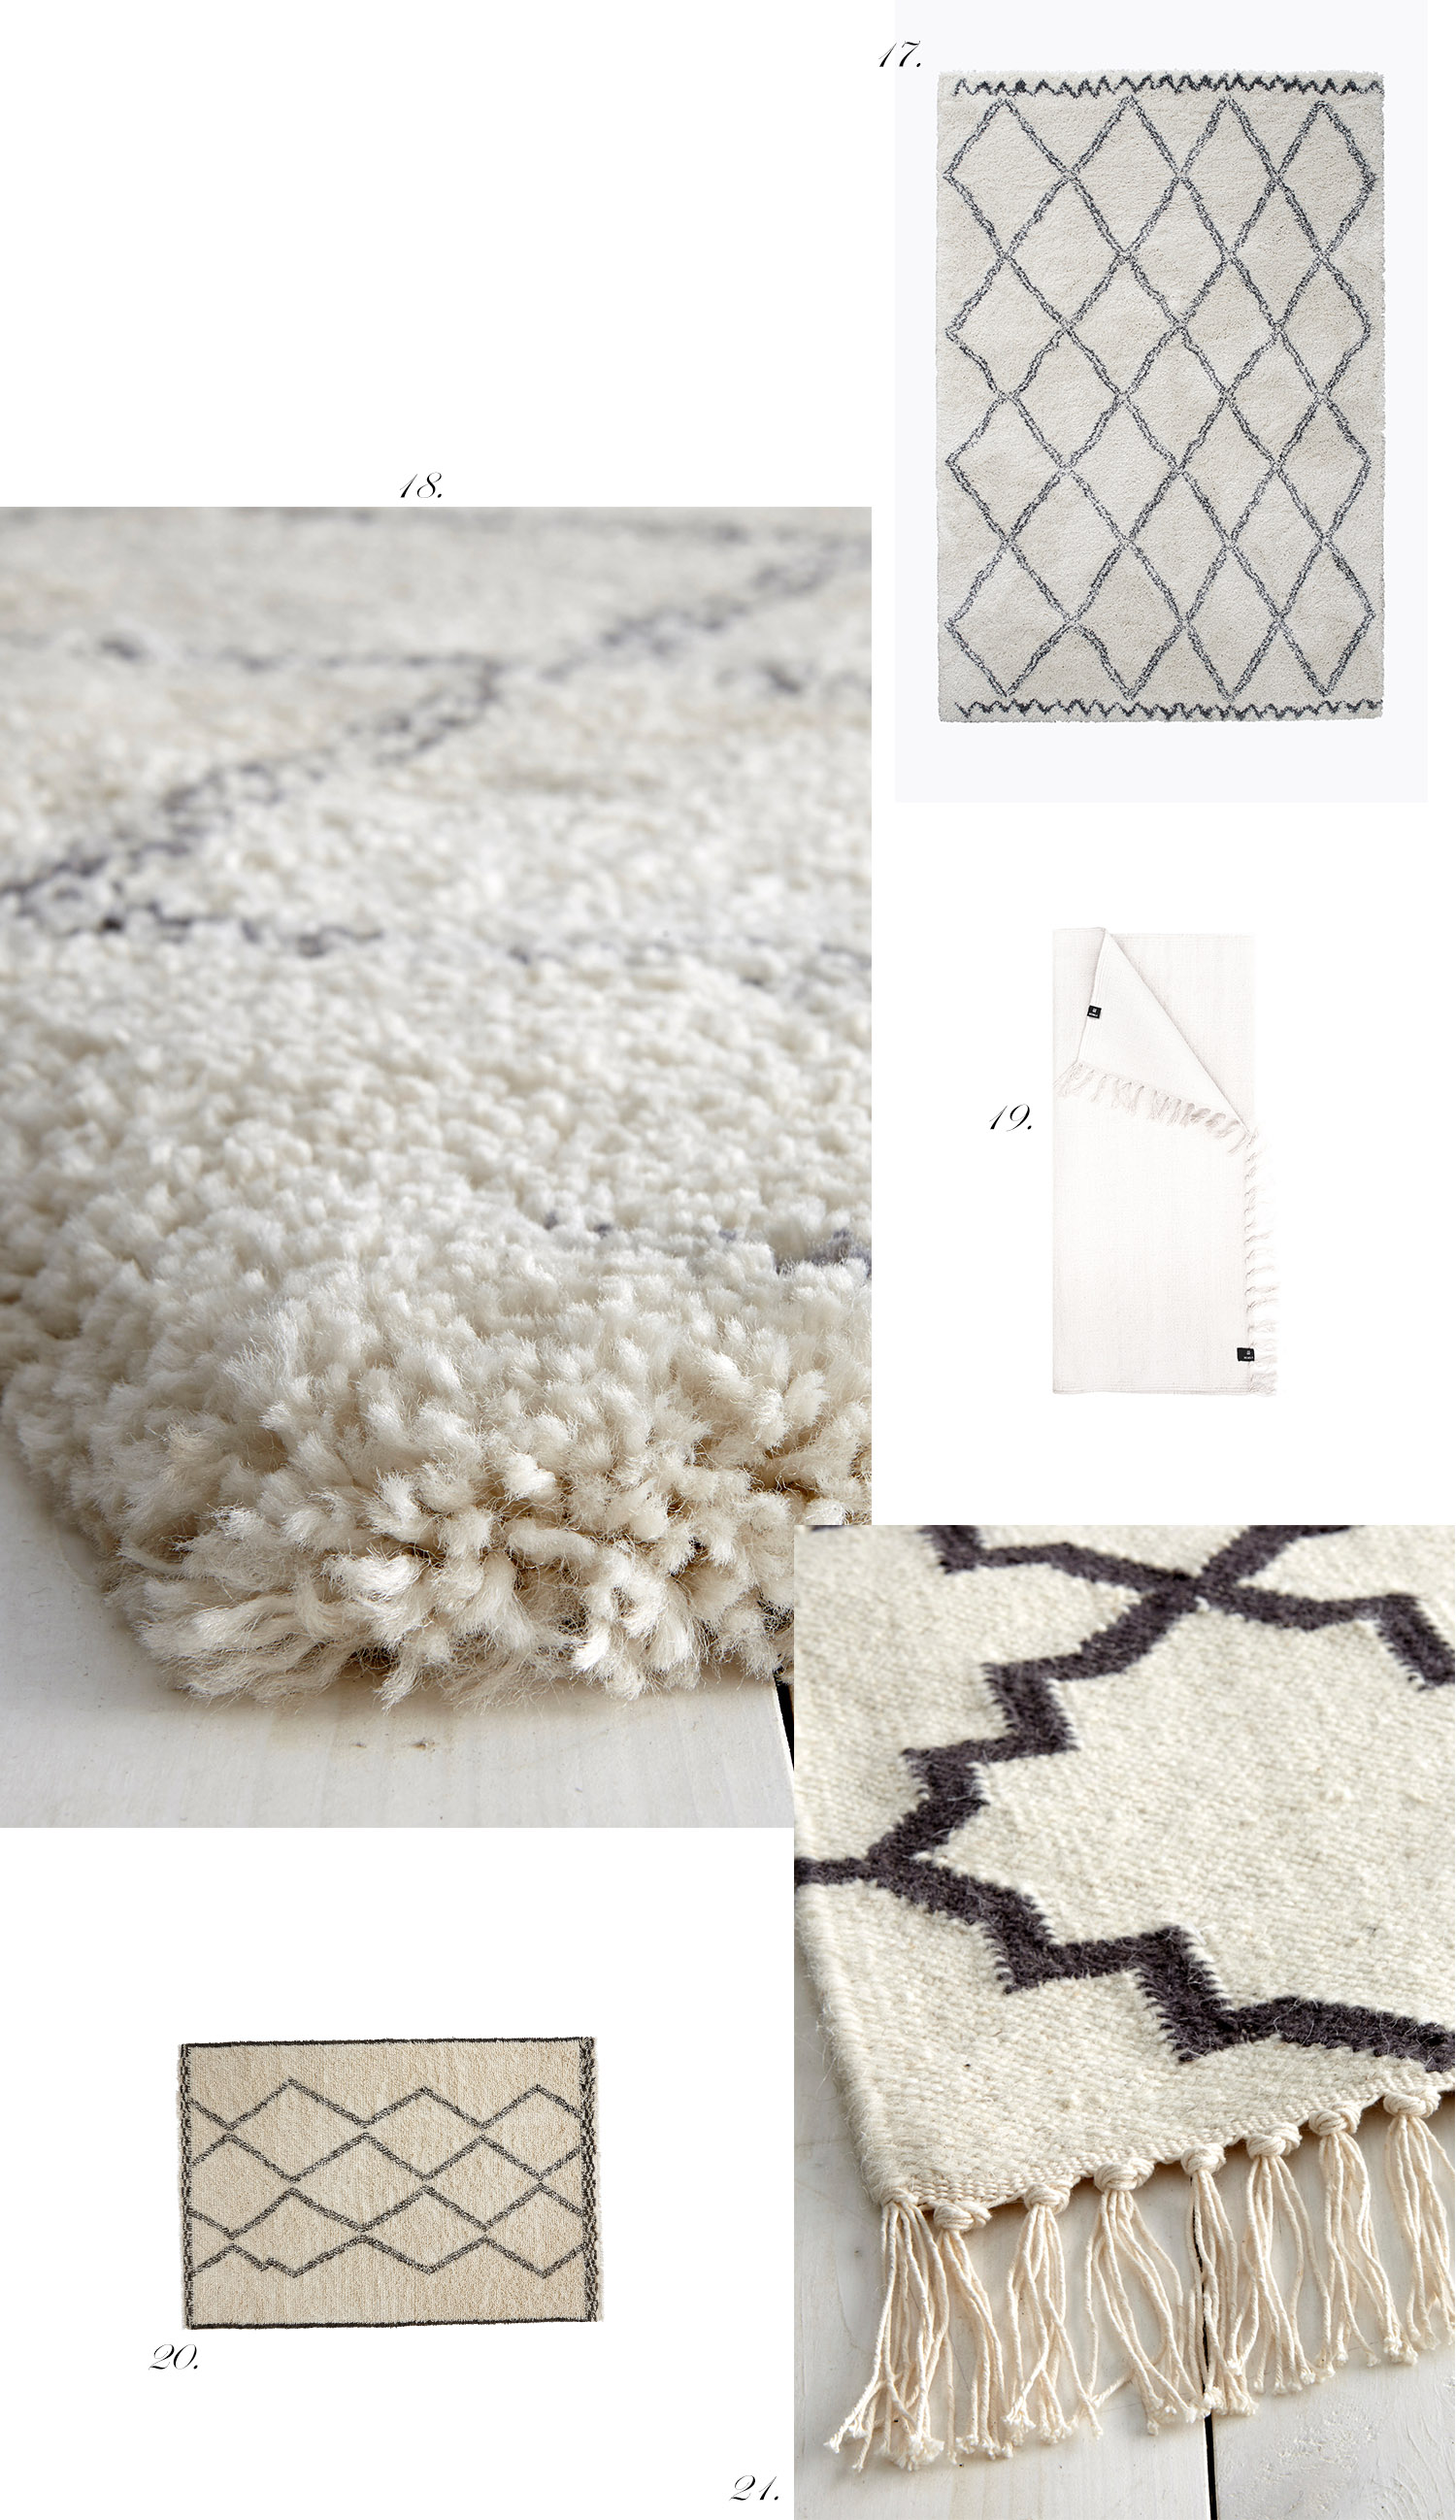 Char and the city - My favorite interior products from Ellos & a SALE code - read more on the blog: www.idealista.fi/charandthecity/2016/08/11/suuri-sisustuspostaus/ #decor #rugs #carpets #beniourain #trends #interior #ellos #hemmahoschar #charandthecity